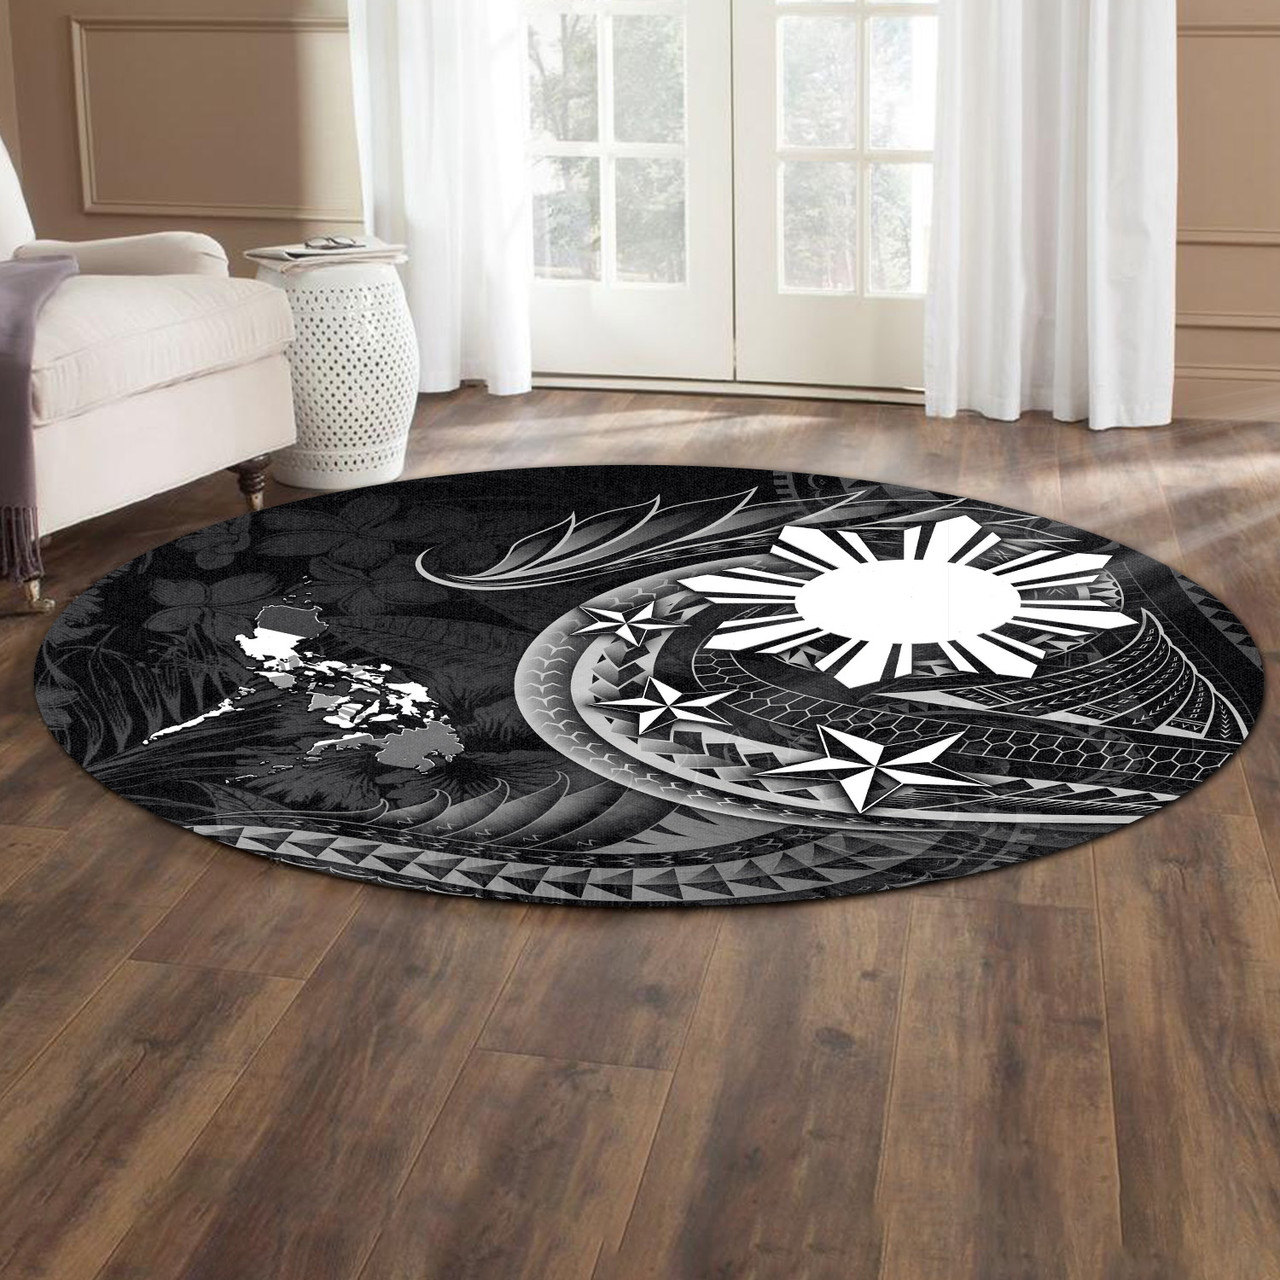 Philippines Filipinos Round Rug Philippines Sun Tribal Patterns Tropical Flowers Curve Style